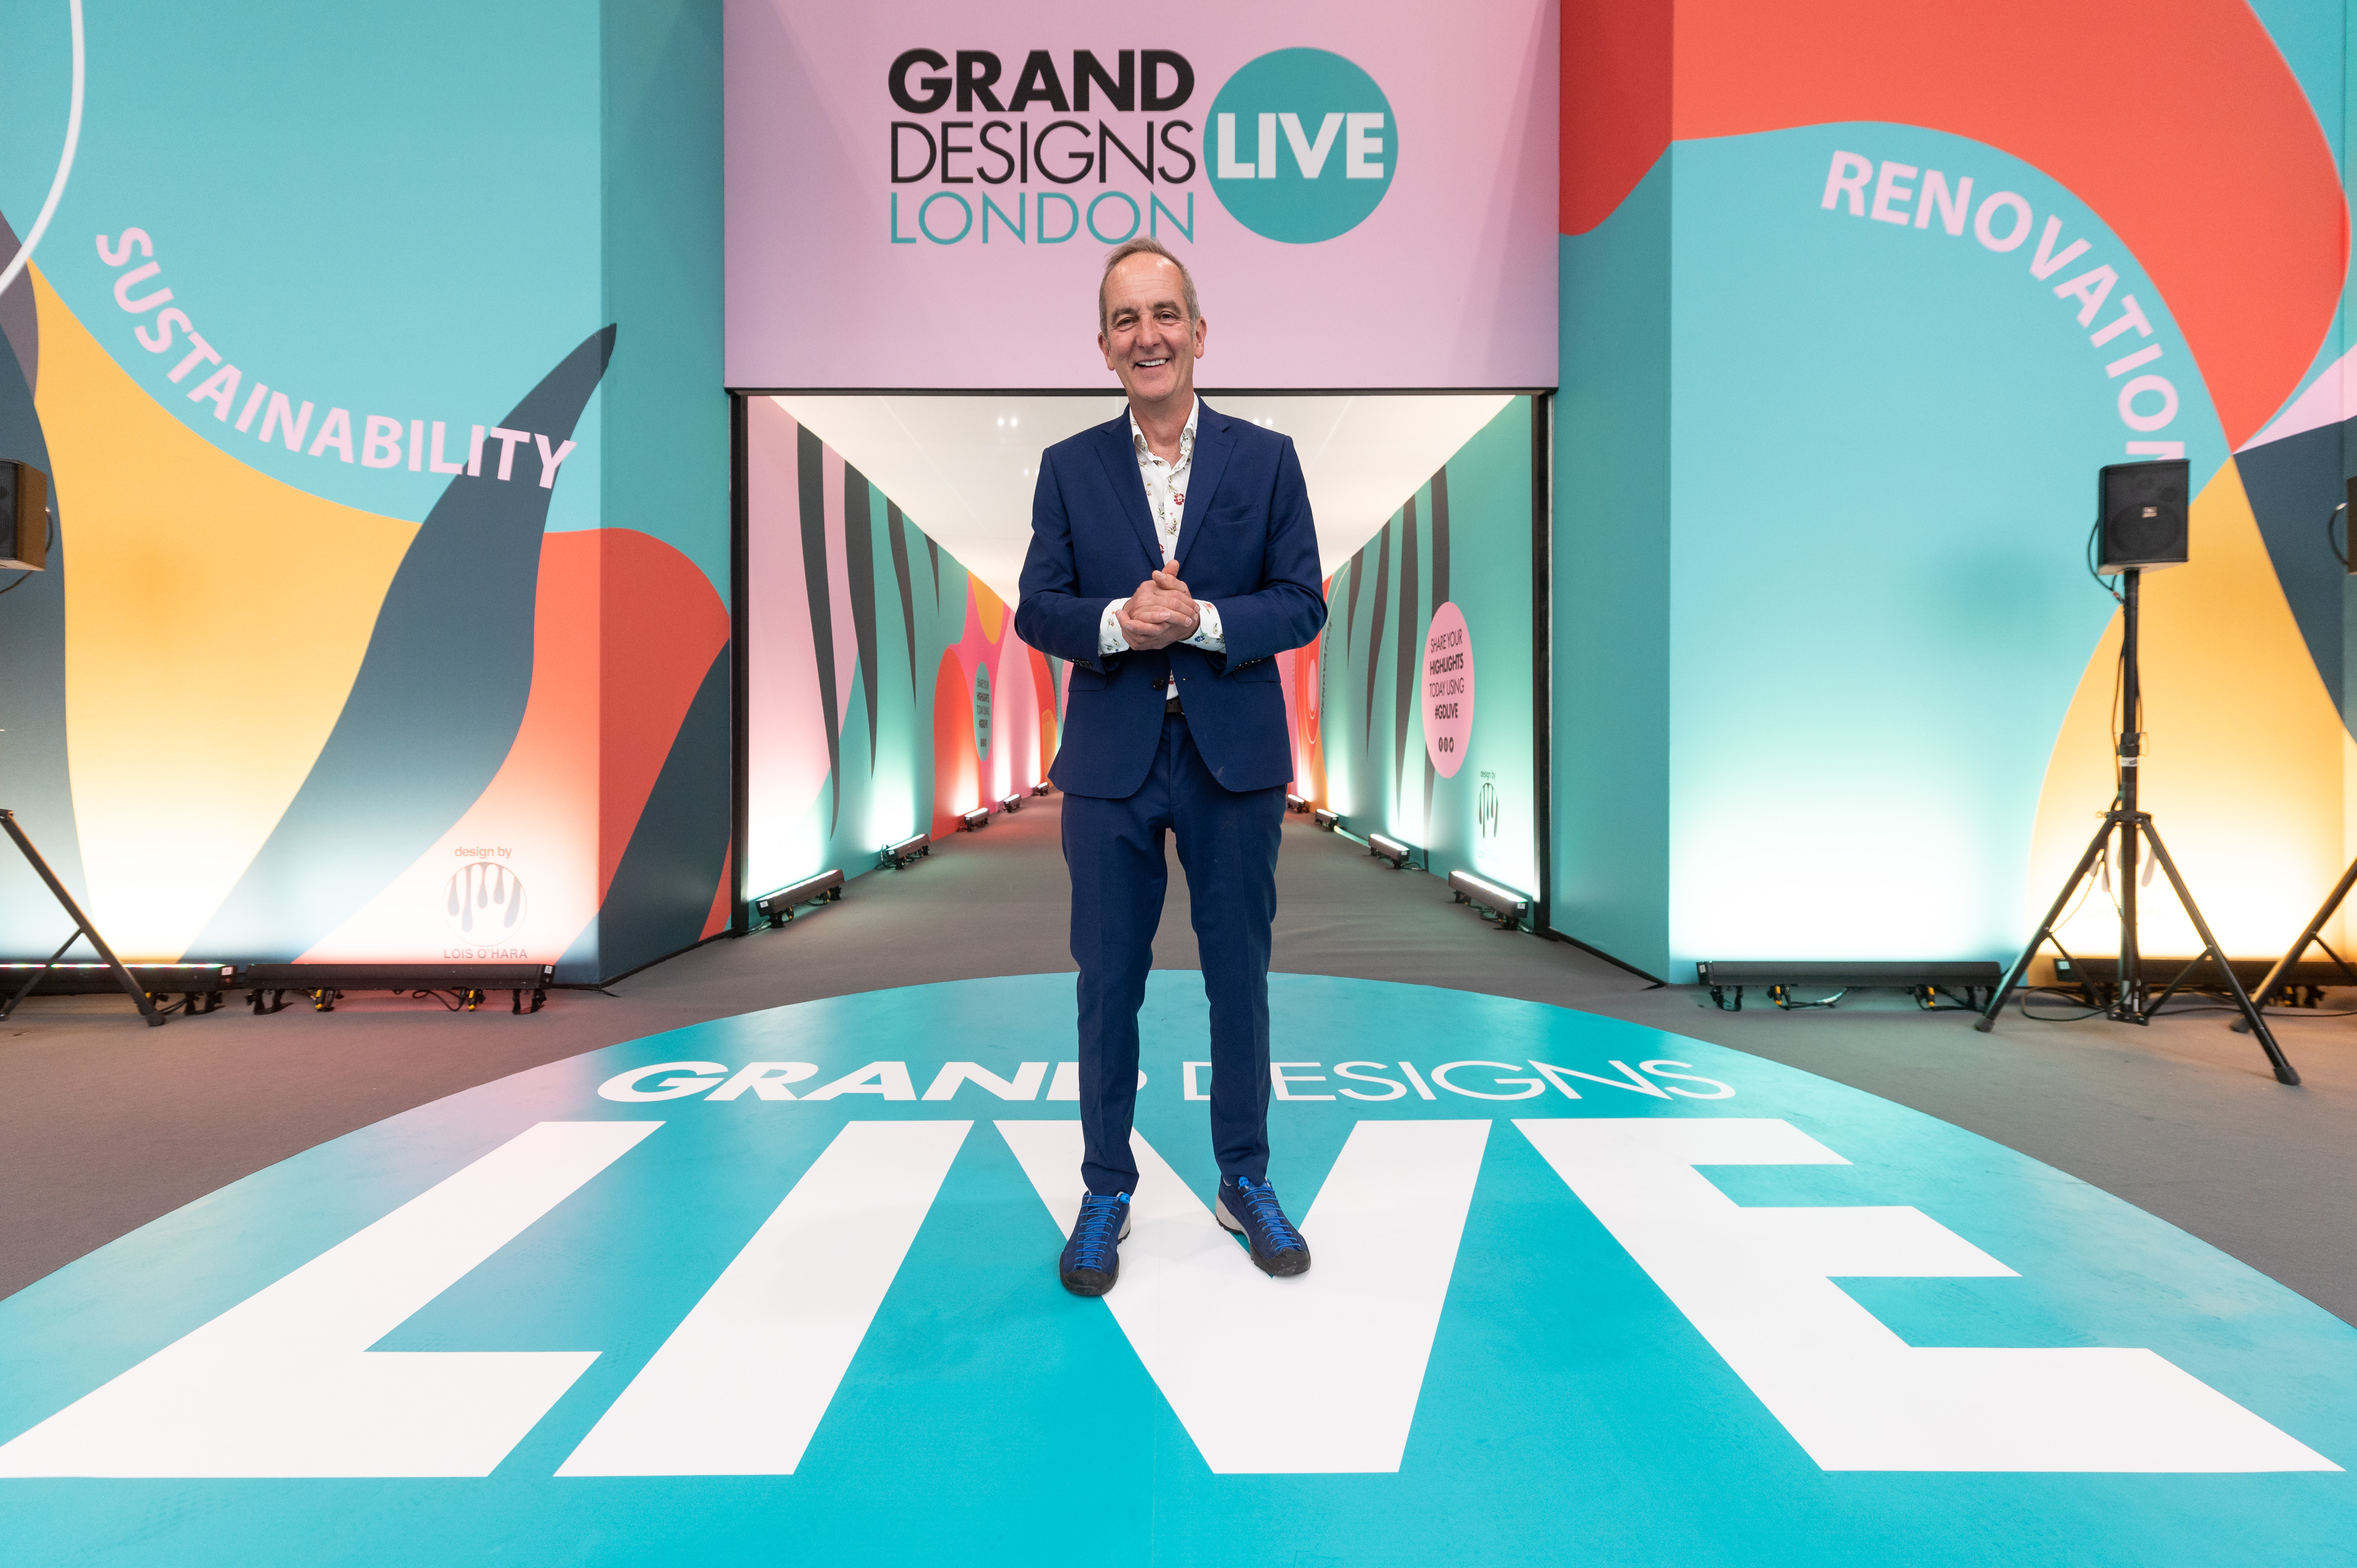 Kevin McCloud stands at the entrance to Grand Designs Live (Grand Designs Live/PA)